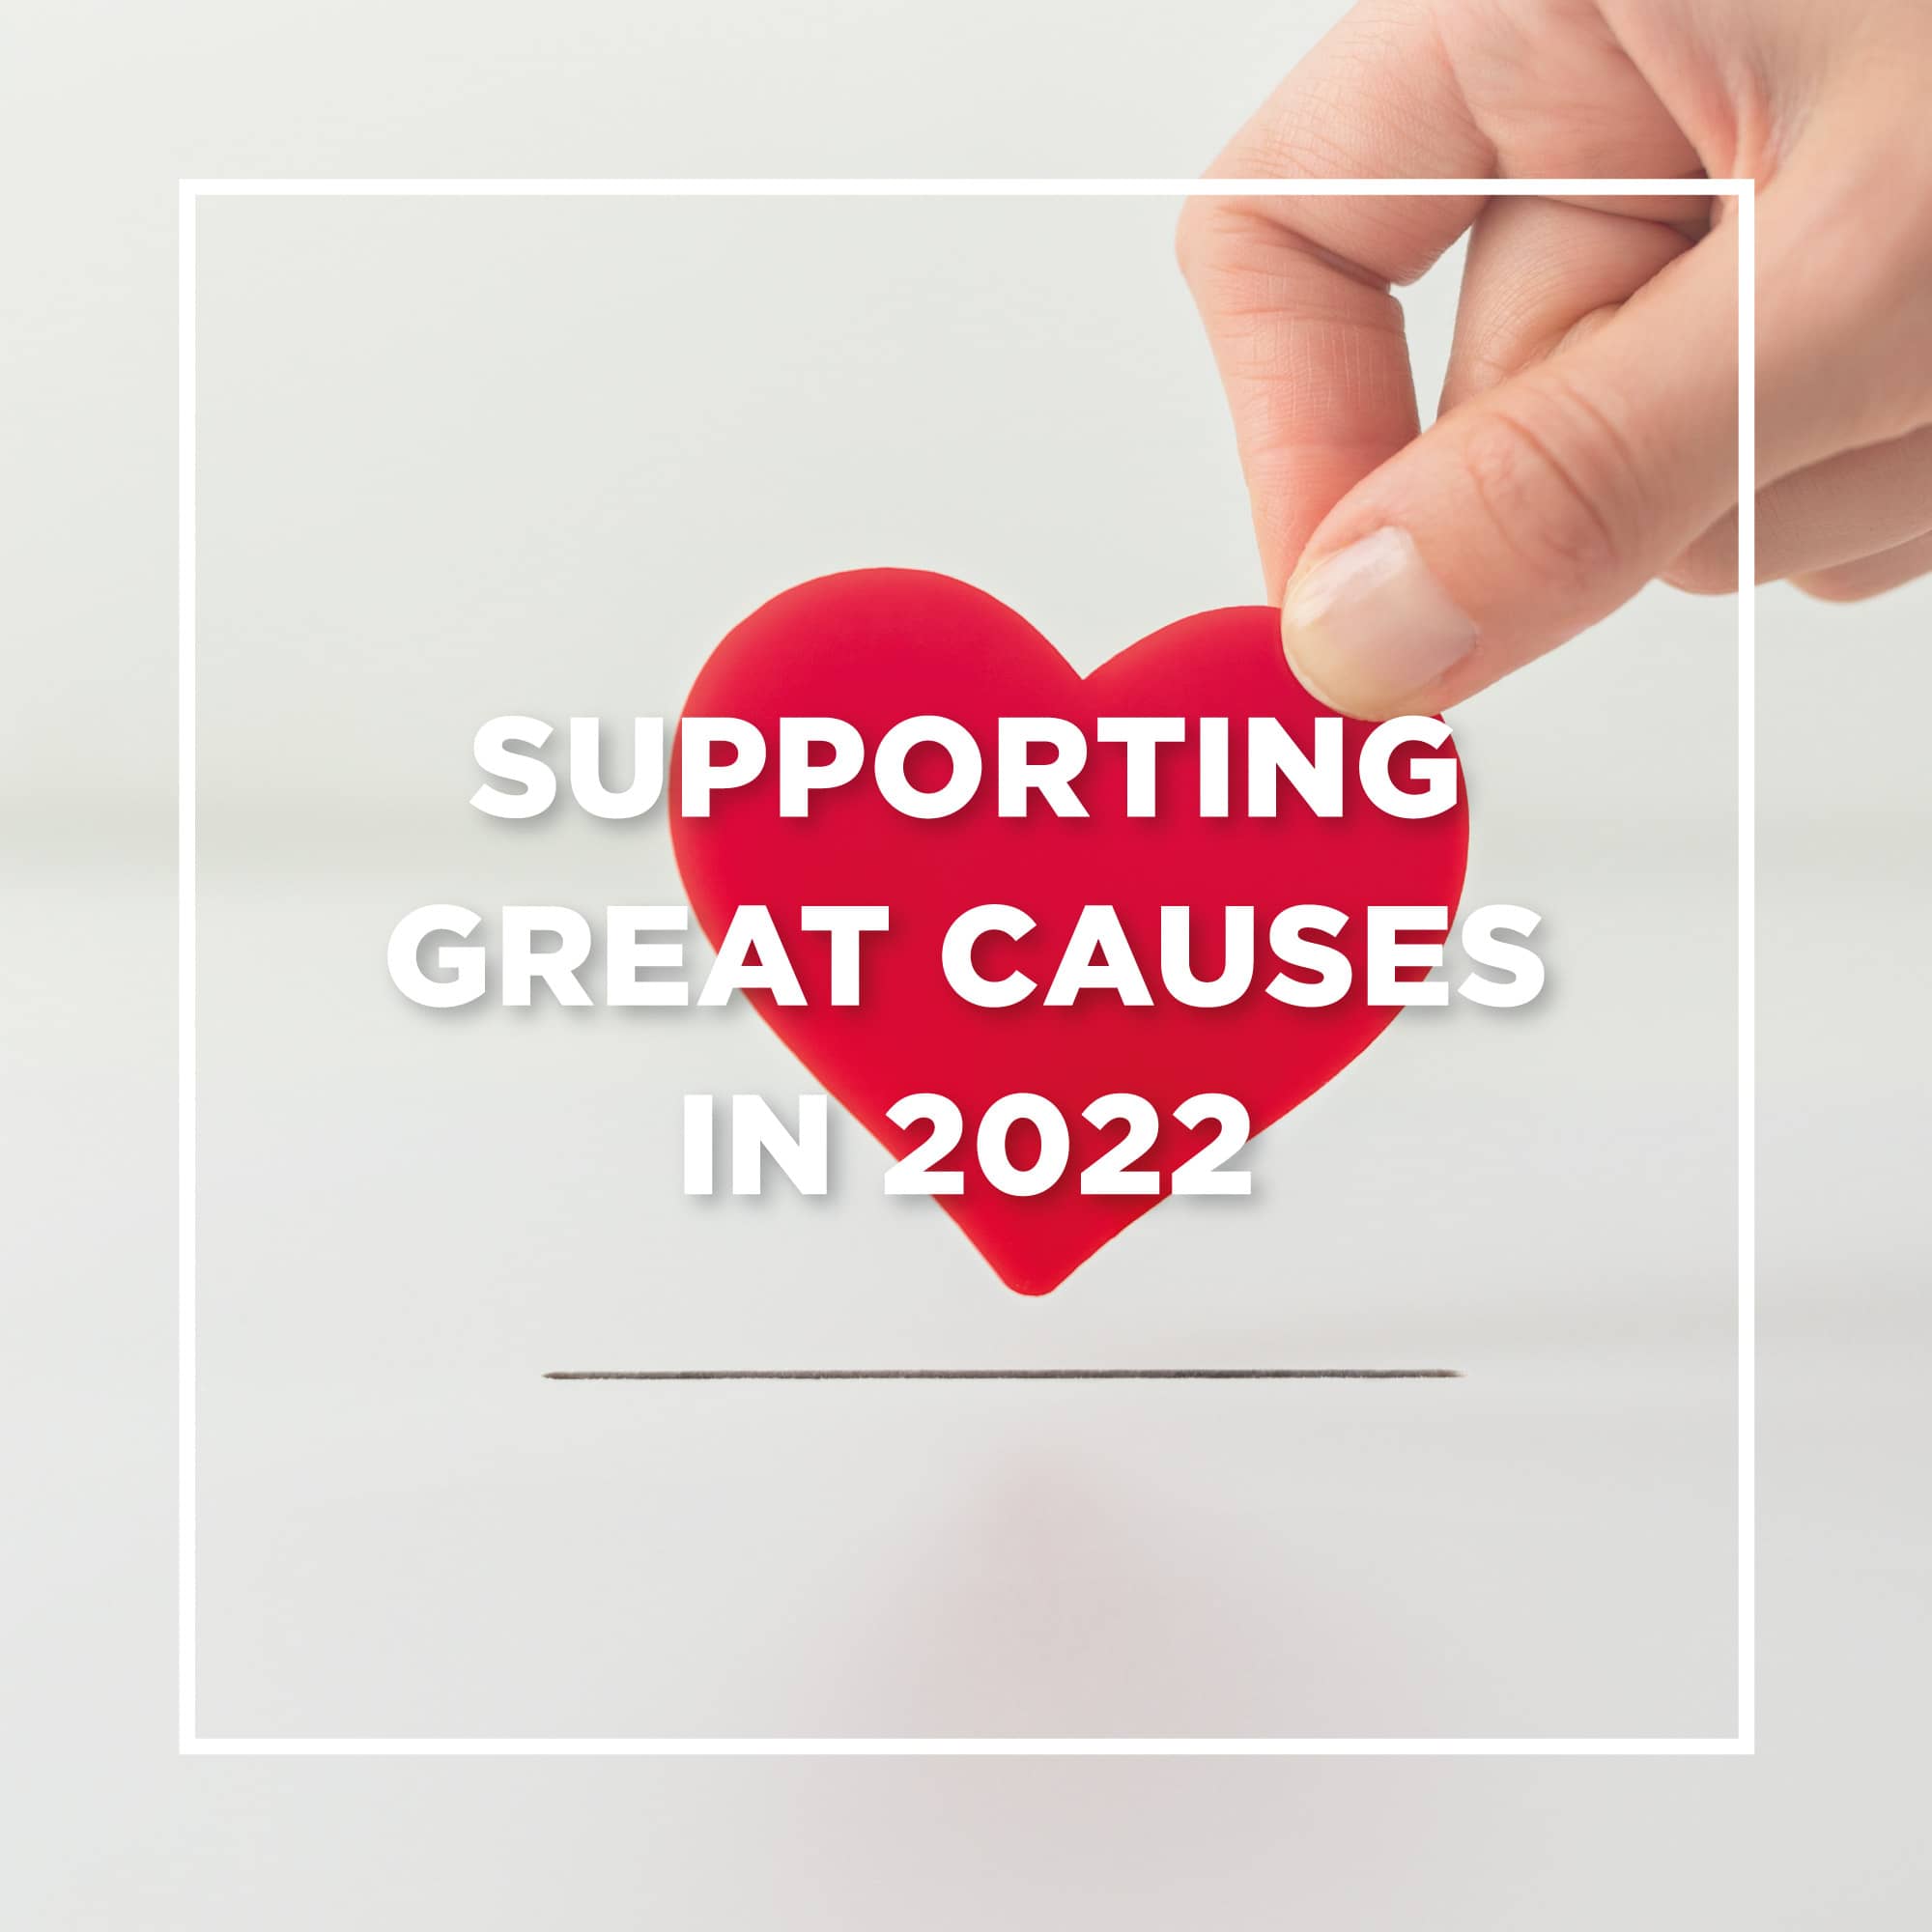 Supporting Great Causes In 2022